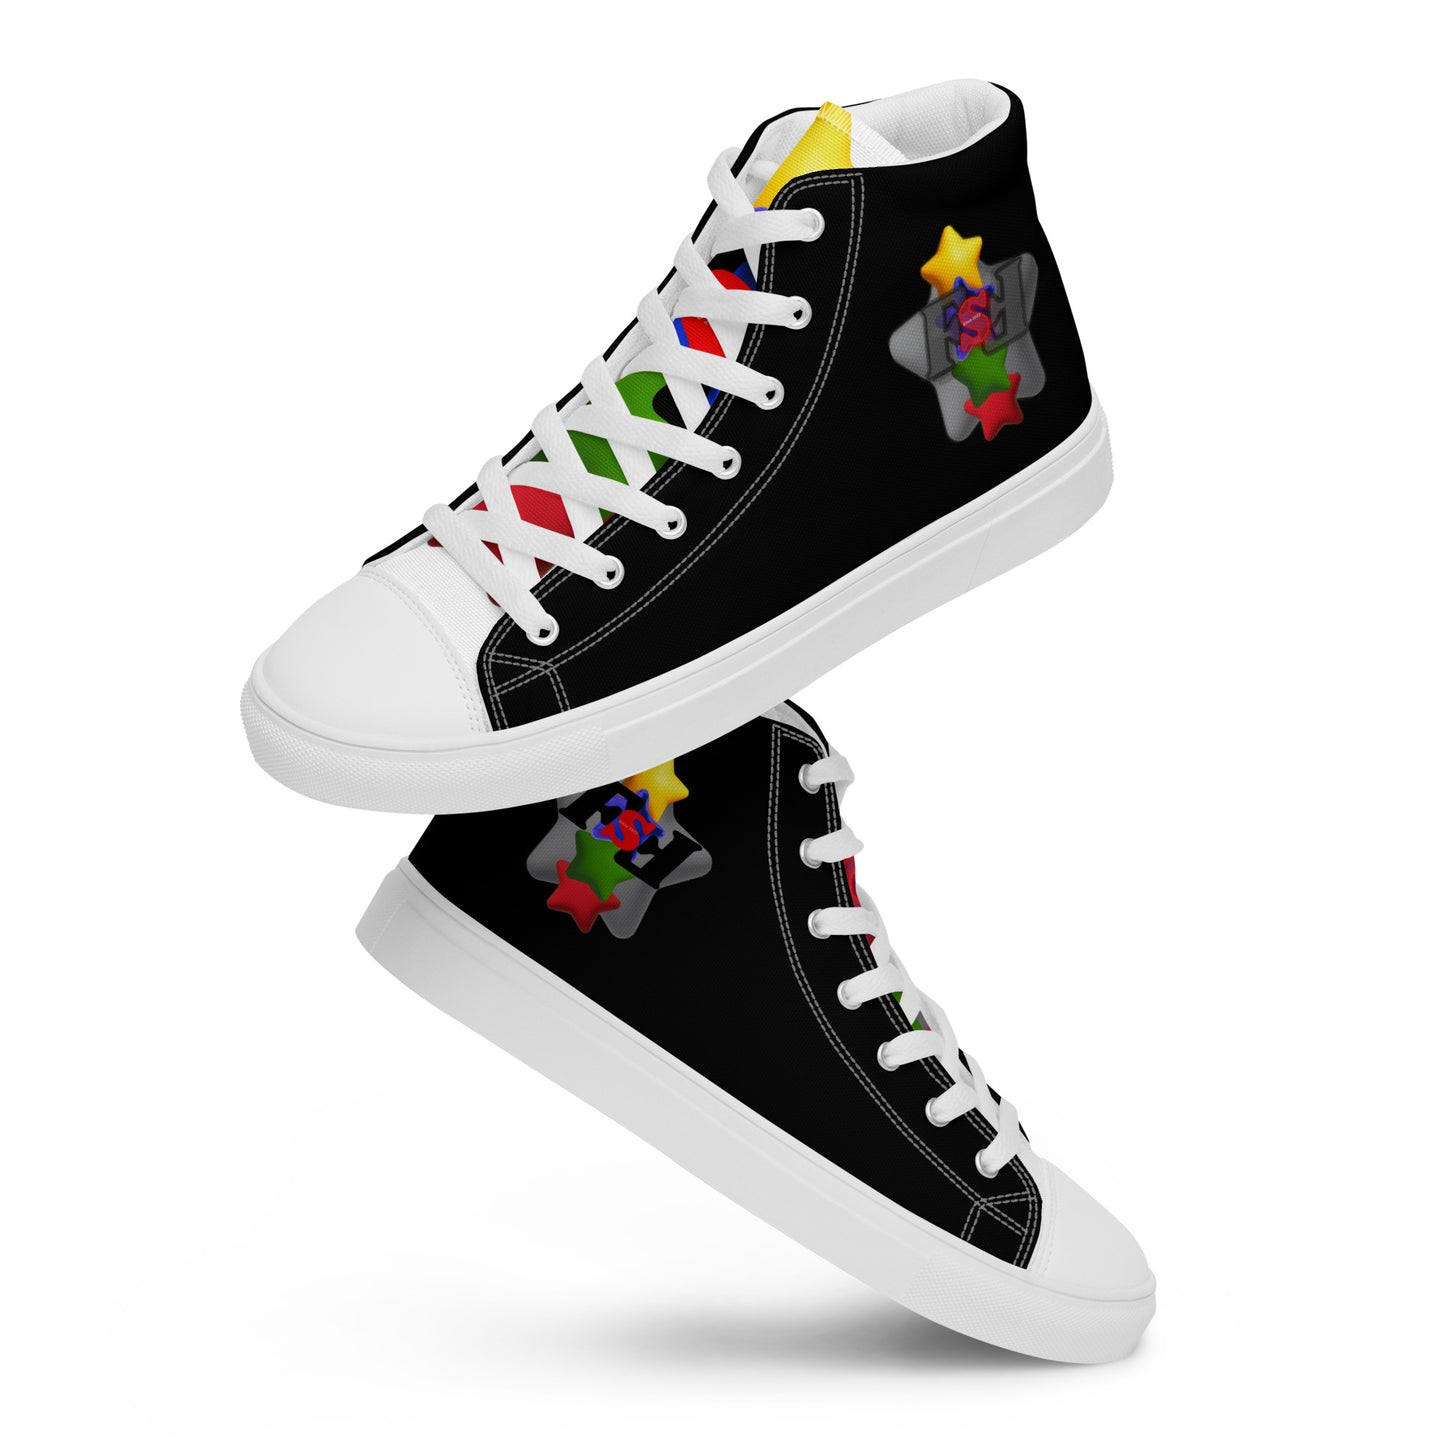 Women’s high top canvas shoes - FSF Stacked 'Gray Star' Black